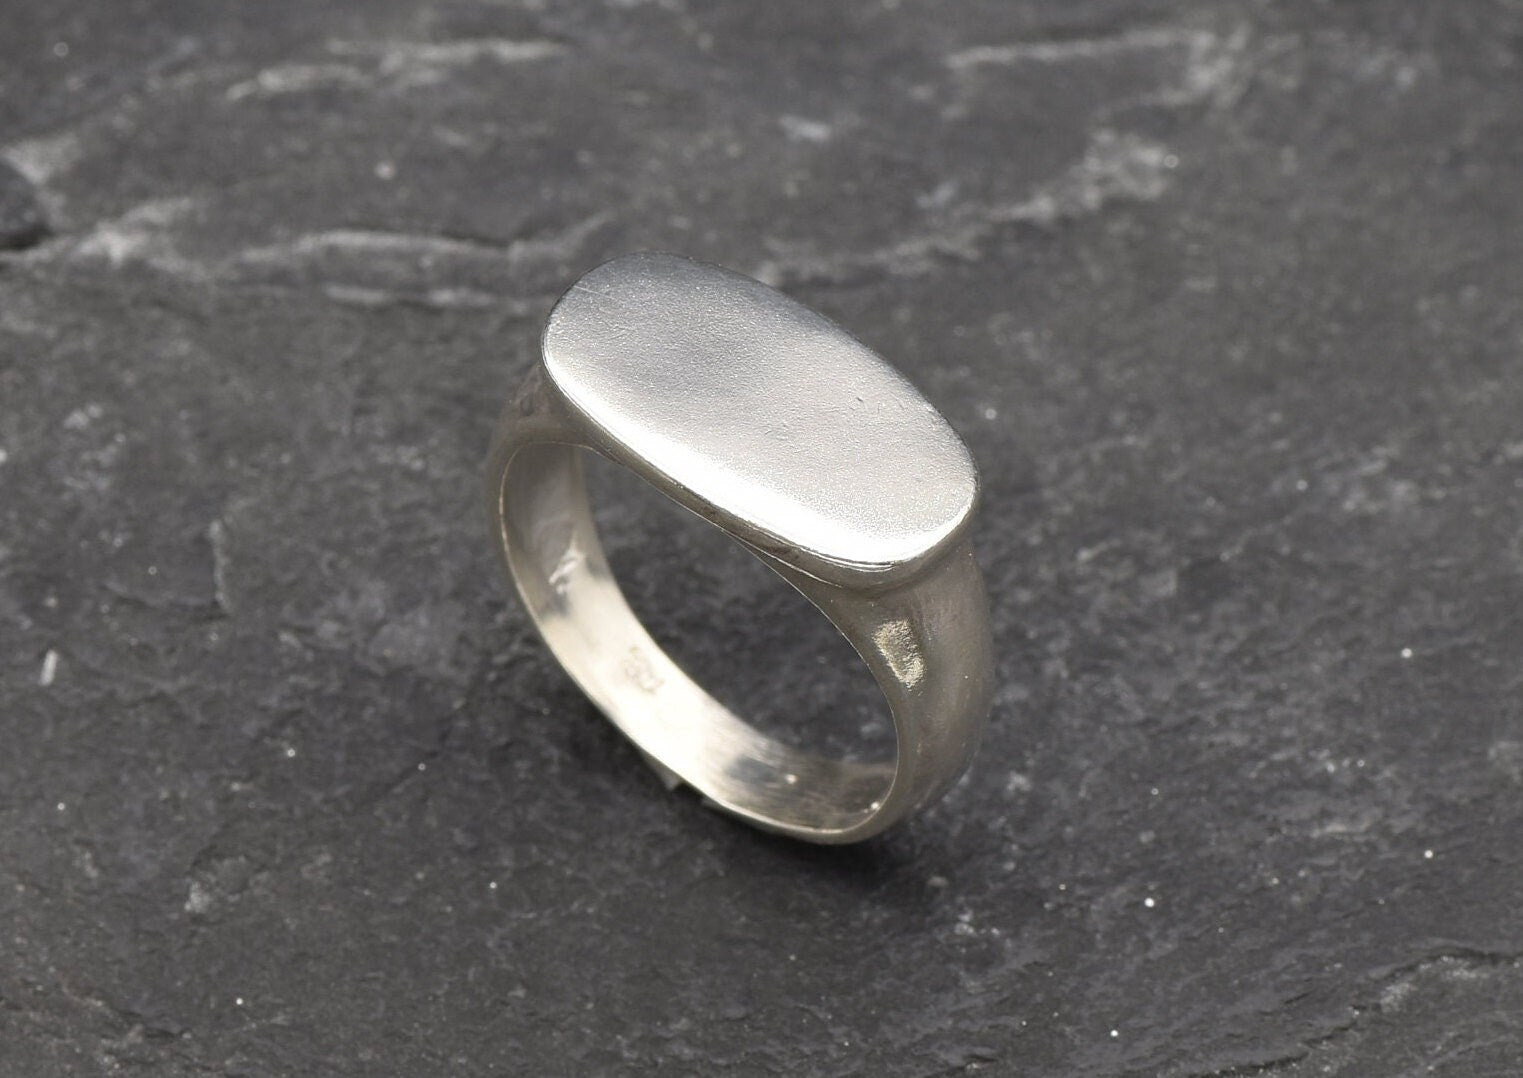 Large Signet Ring, Flat Top Silver Ring, Sturdy Ring, Solid Silver Ring, Unisex Ring, Ring for Engraving, Wide Band, 925 Sterling Silver